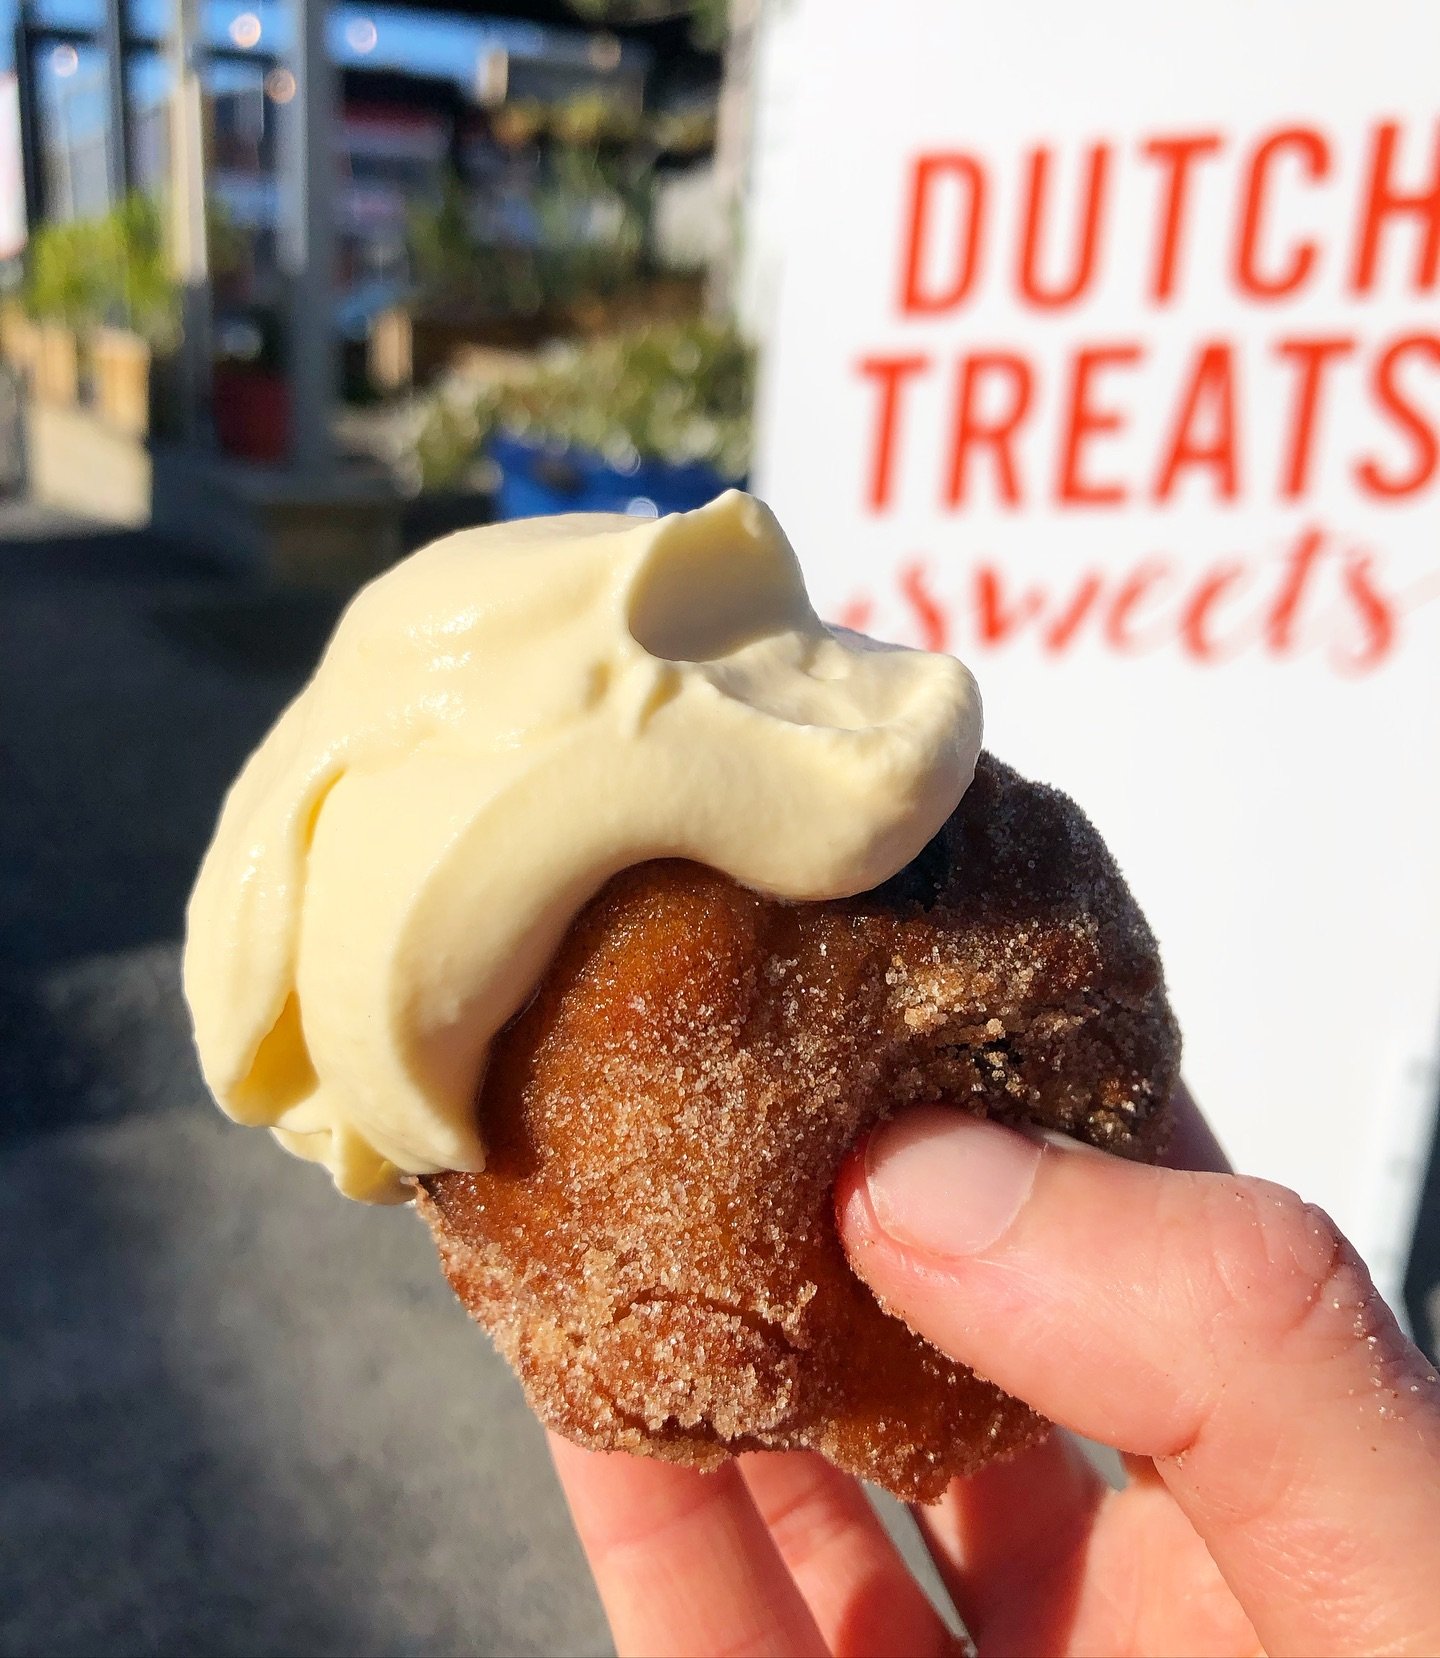 Kāpiti, it&rsquo;s your turn!

Oliebollen are on the menu for this Saturday. 9am till 12pm or sold out. 4a Sheffield St, Paraparaumu. 
We can&rsquo;t wait to see you! 

#montfoortnz #dutch #oliebollen #donuts